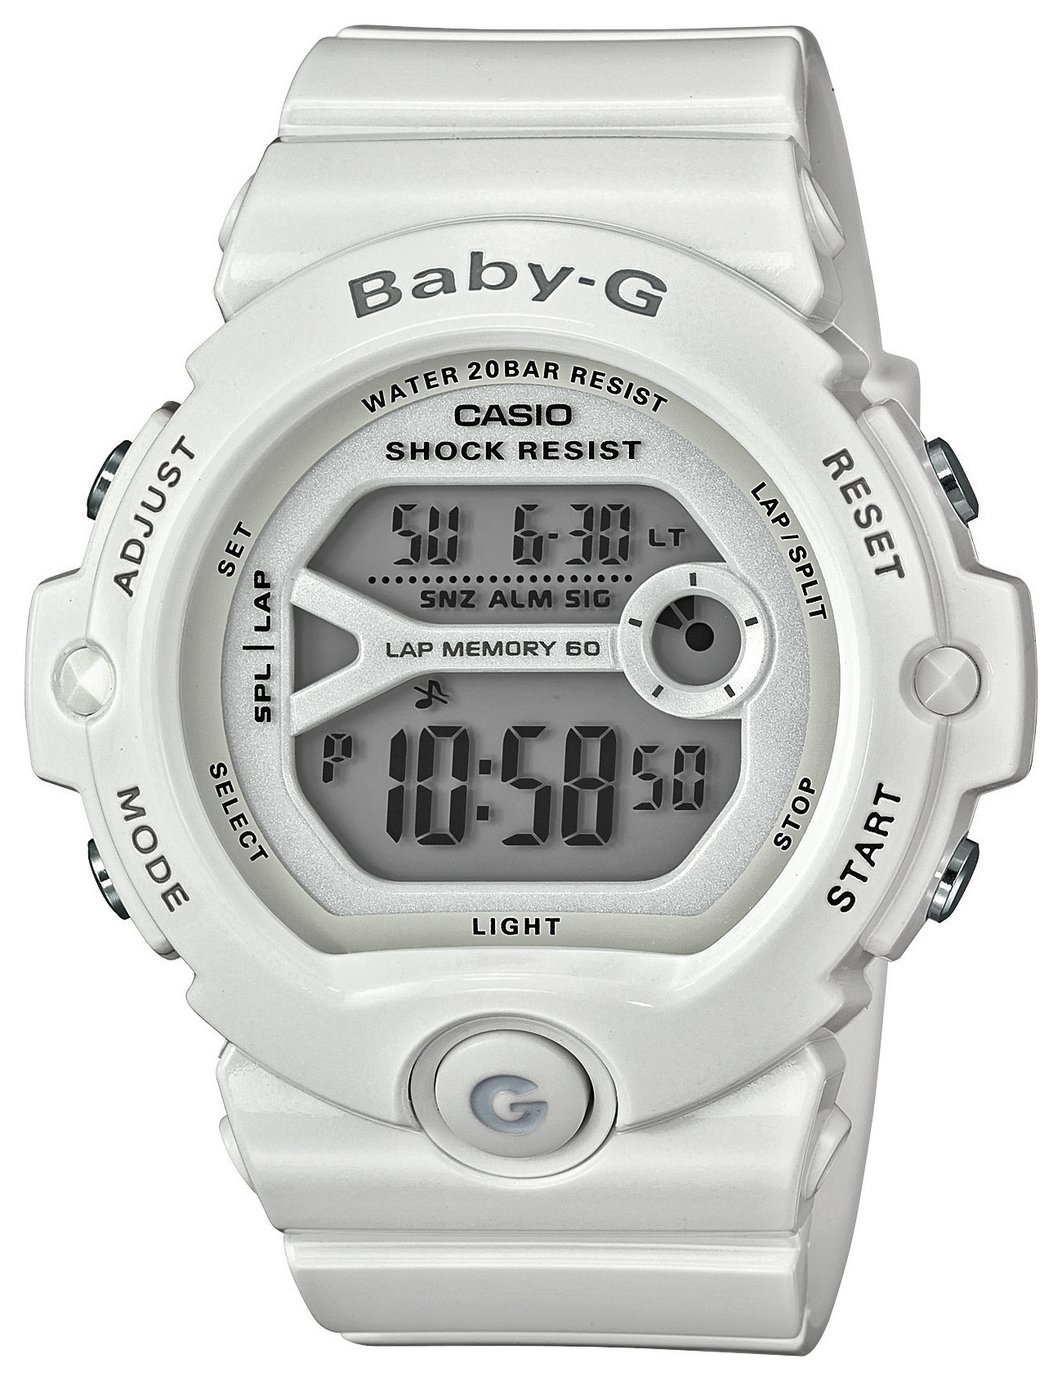 Casio Baby-G Ladies' White Shock Resistant Watch Review